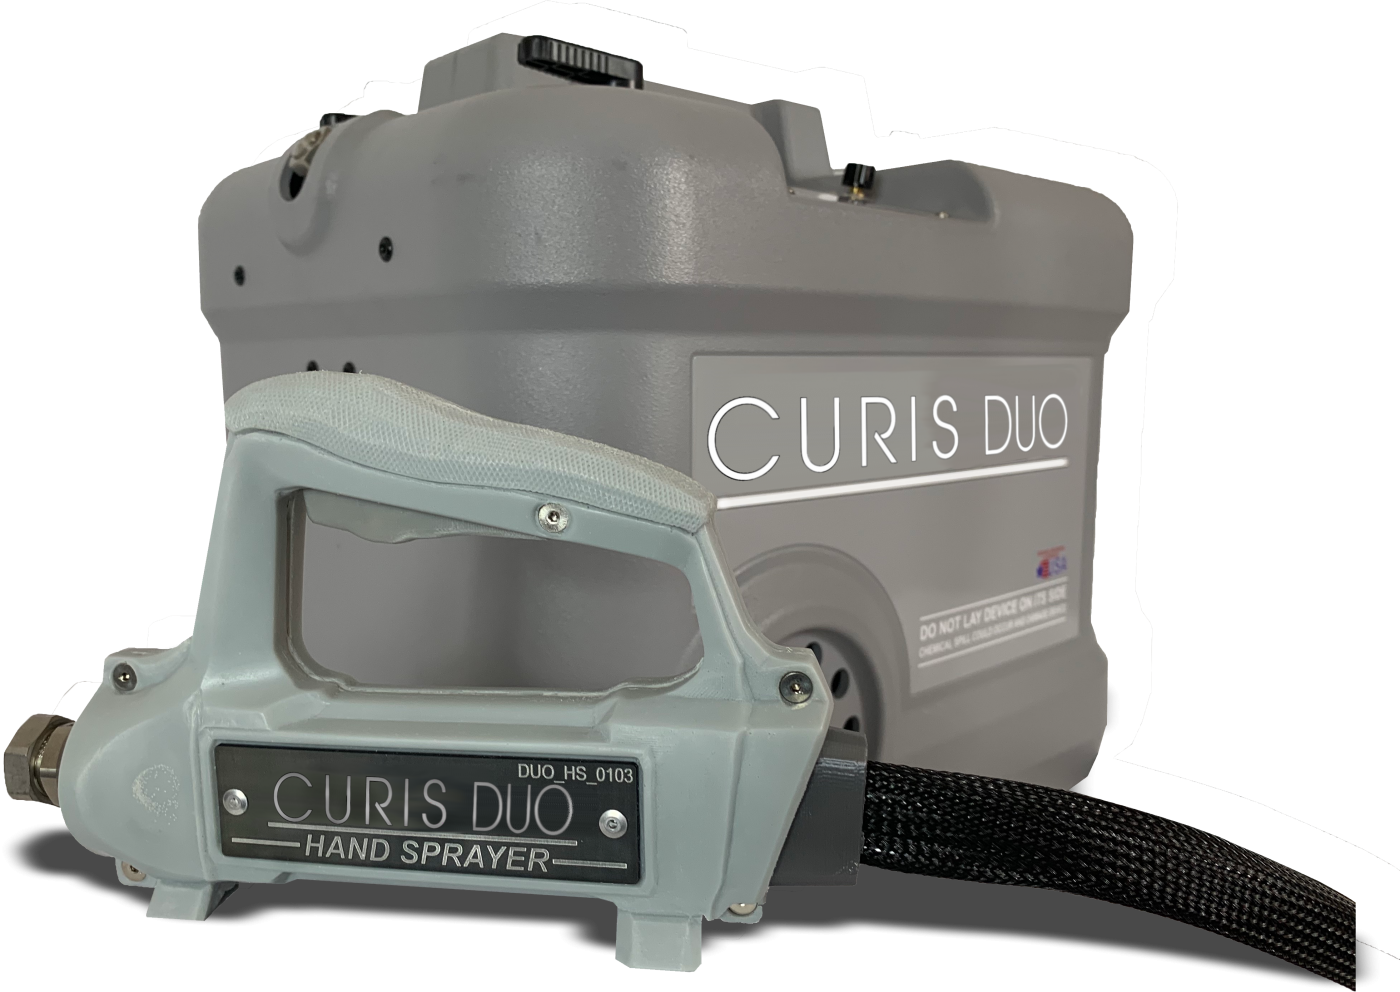 CURIS DUO fog and spray disinfection